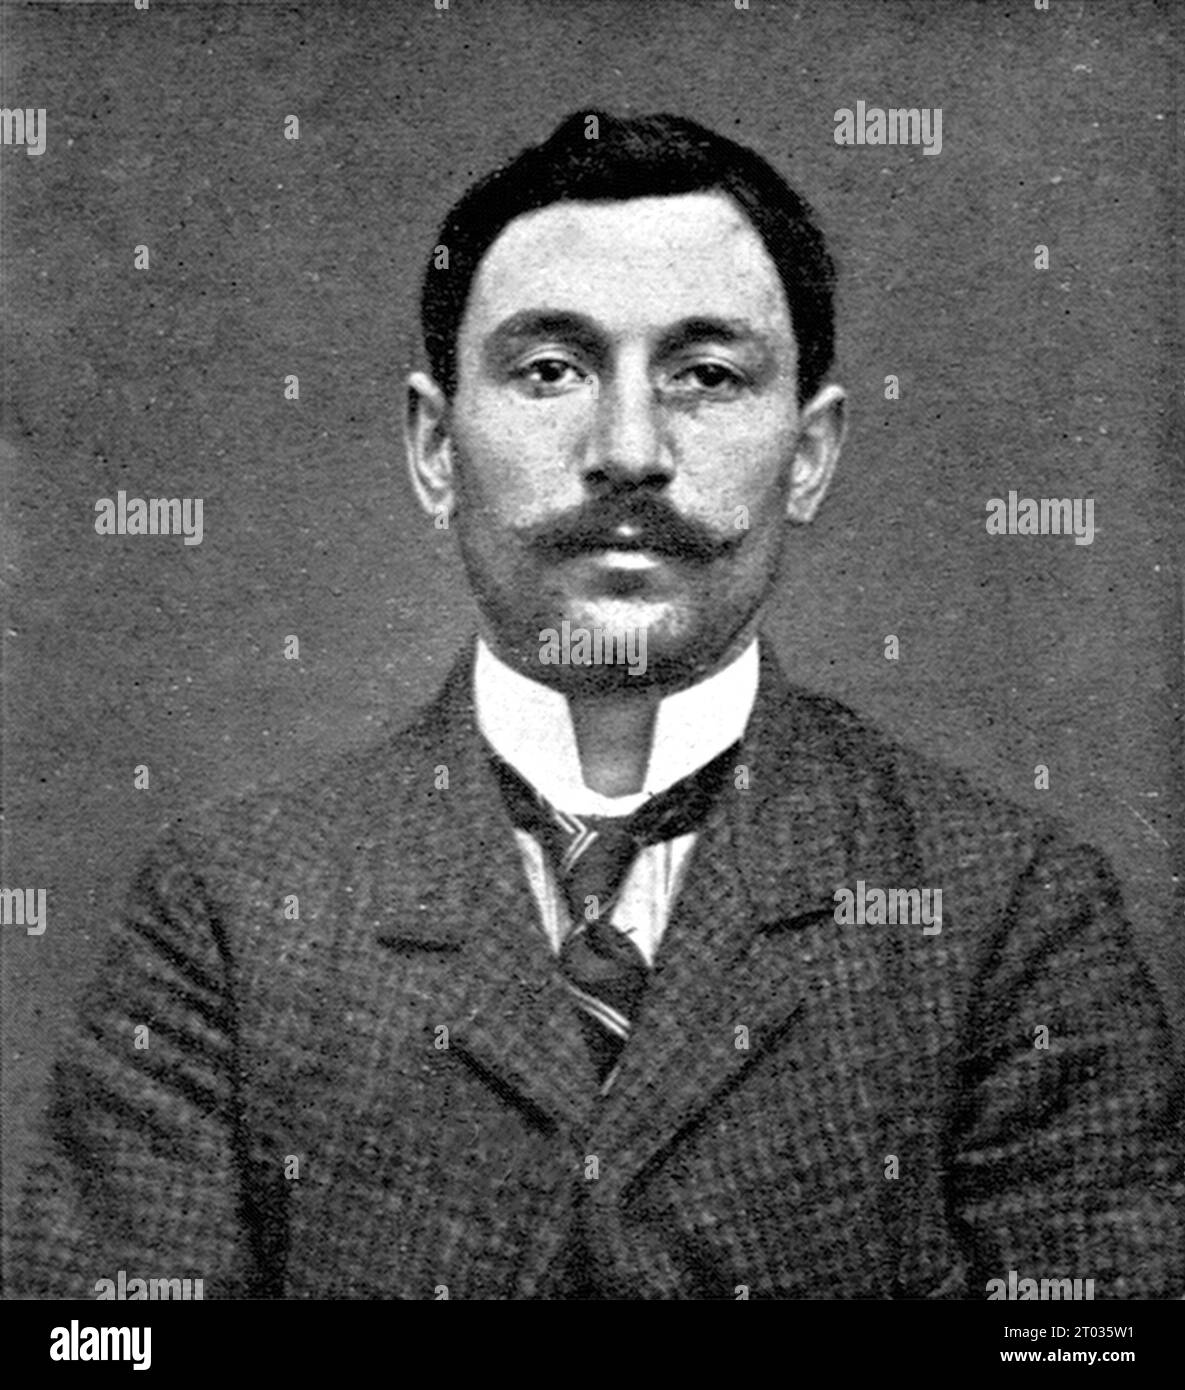 Vincenzo Peruggia, believed to have stolen the Mona Lisa in 1911. A ...